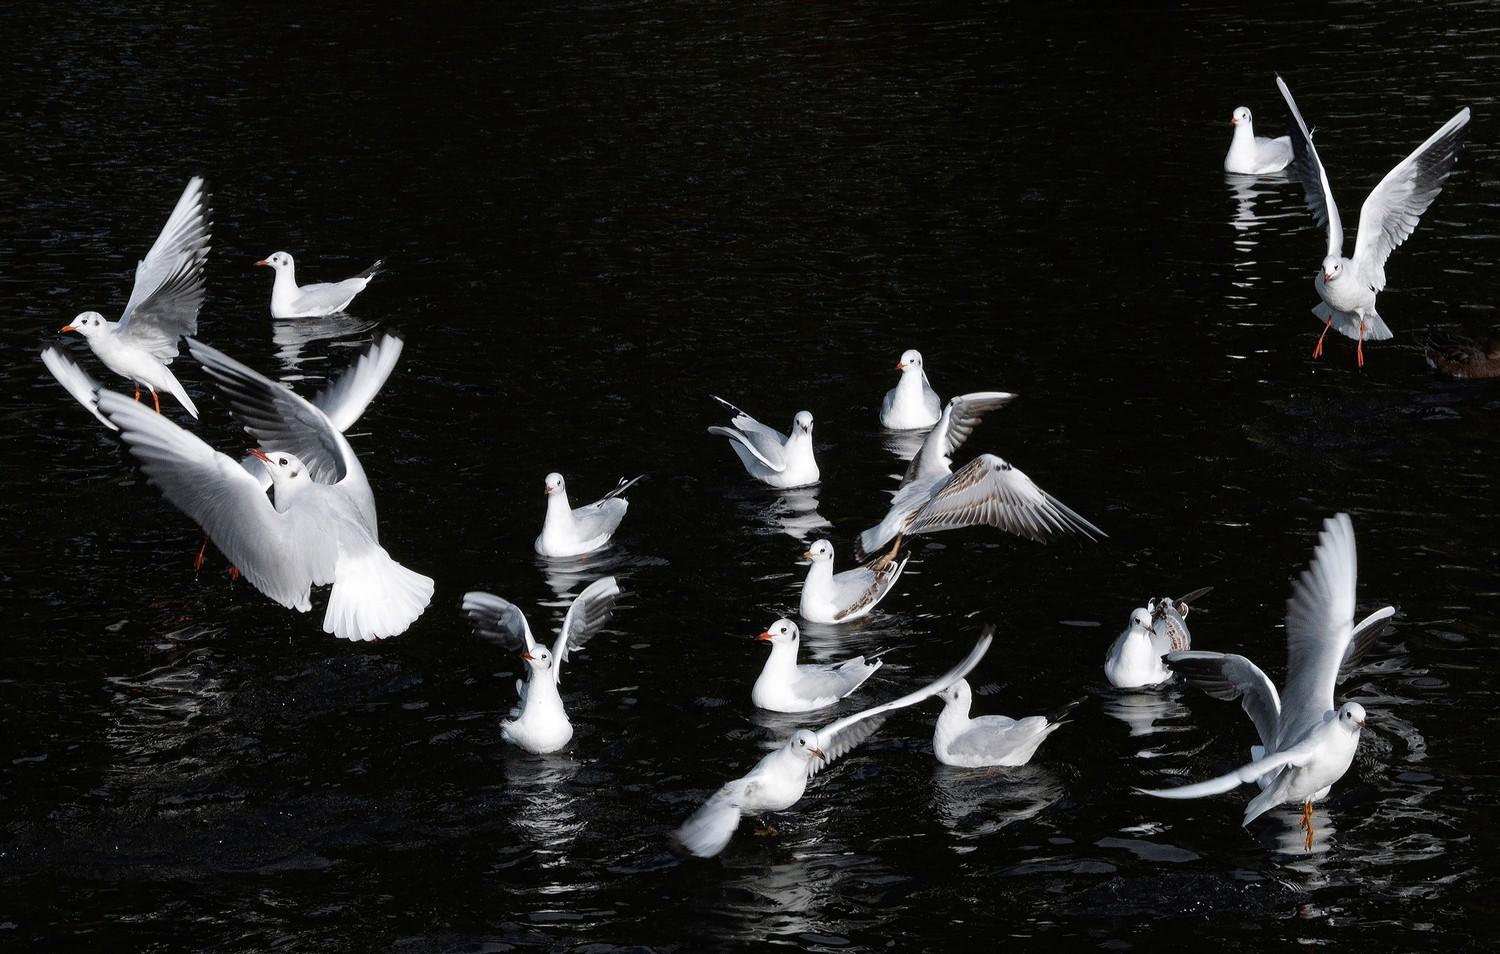 Rob Taggart (by), Seagulls in Flight, digital print, signed to verso, non embossed, 19.3" x 15.4".